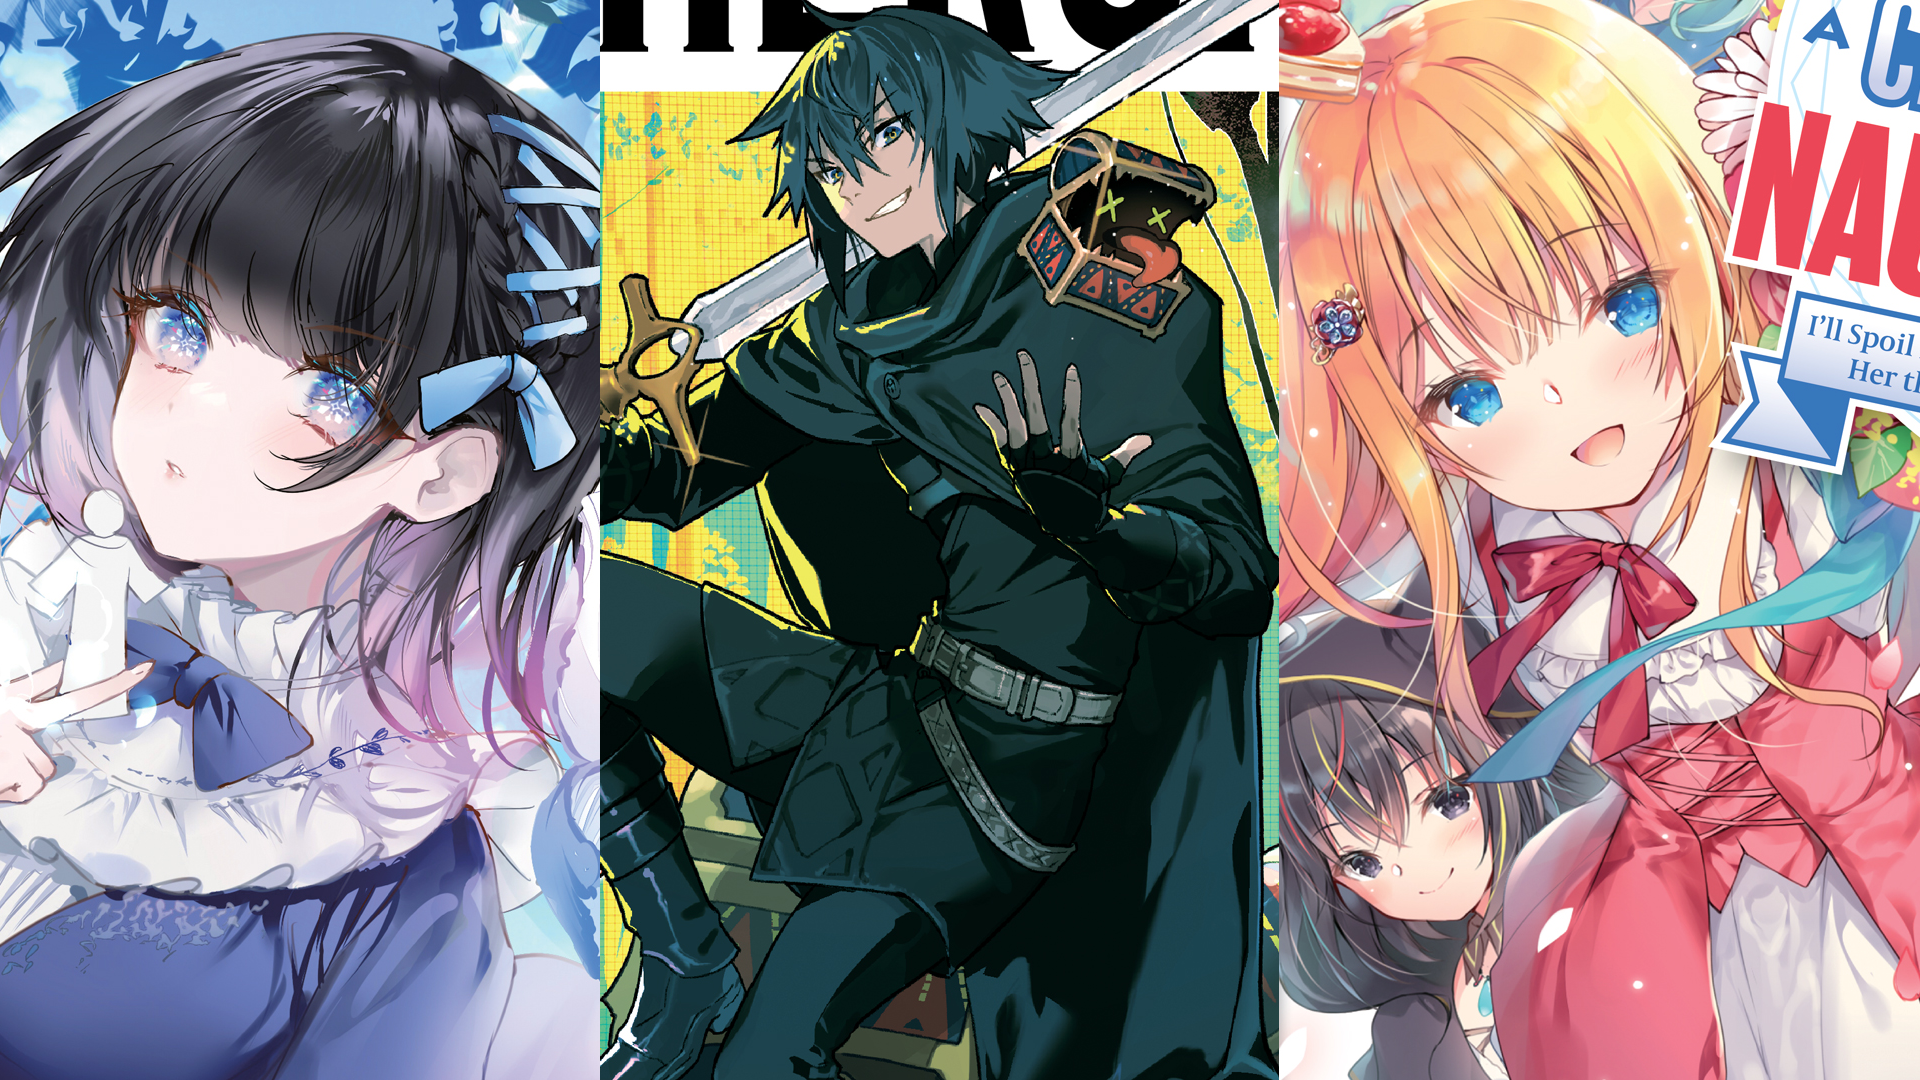 Manga Focus: These Were the Titles Eclipsed by Others on Oricon in April,  but Shouldn't Be Missed - Erzat